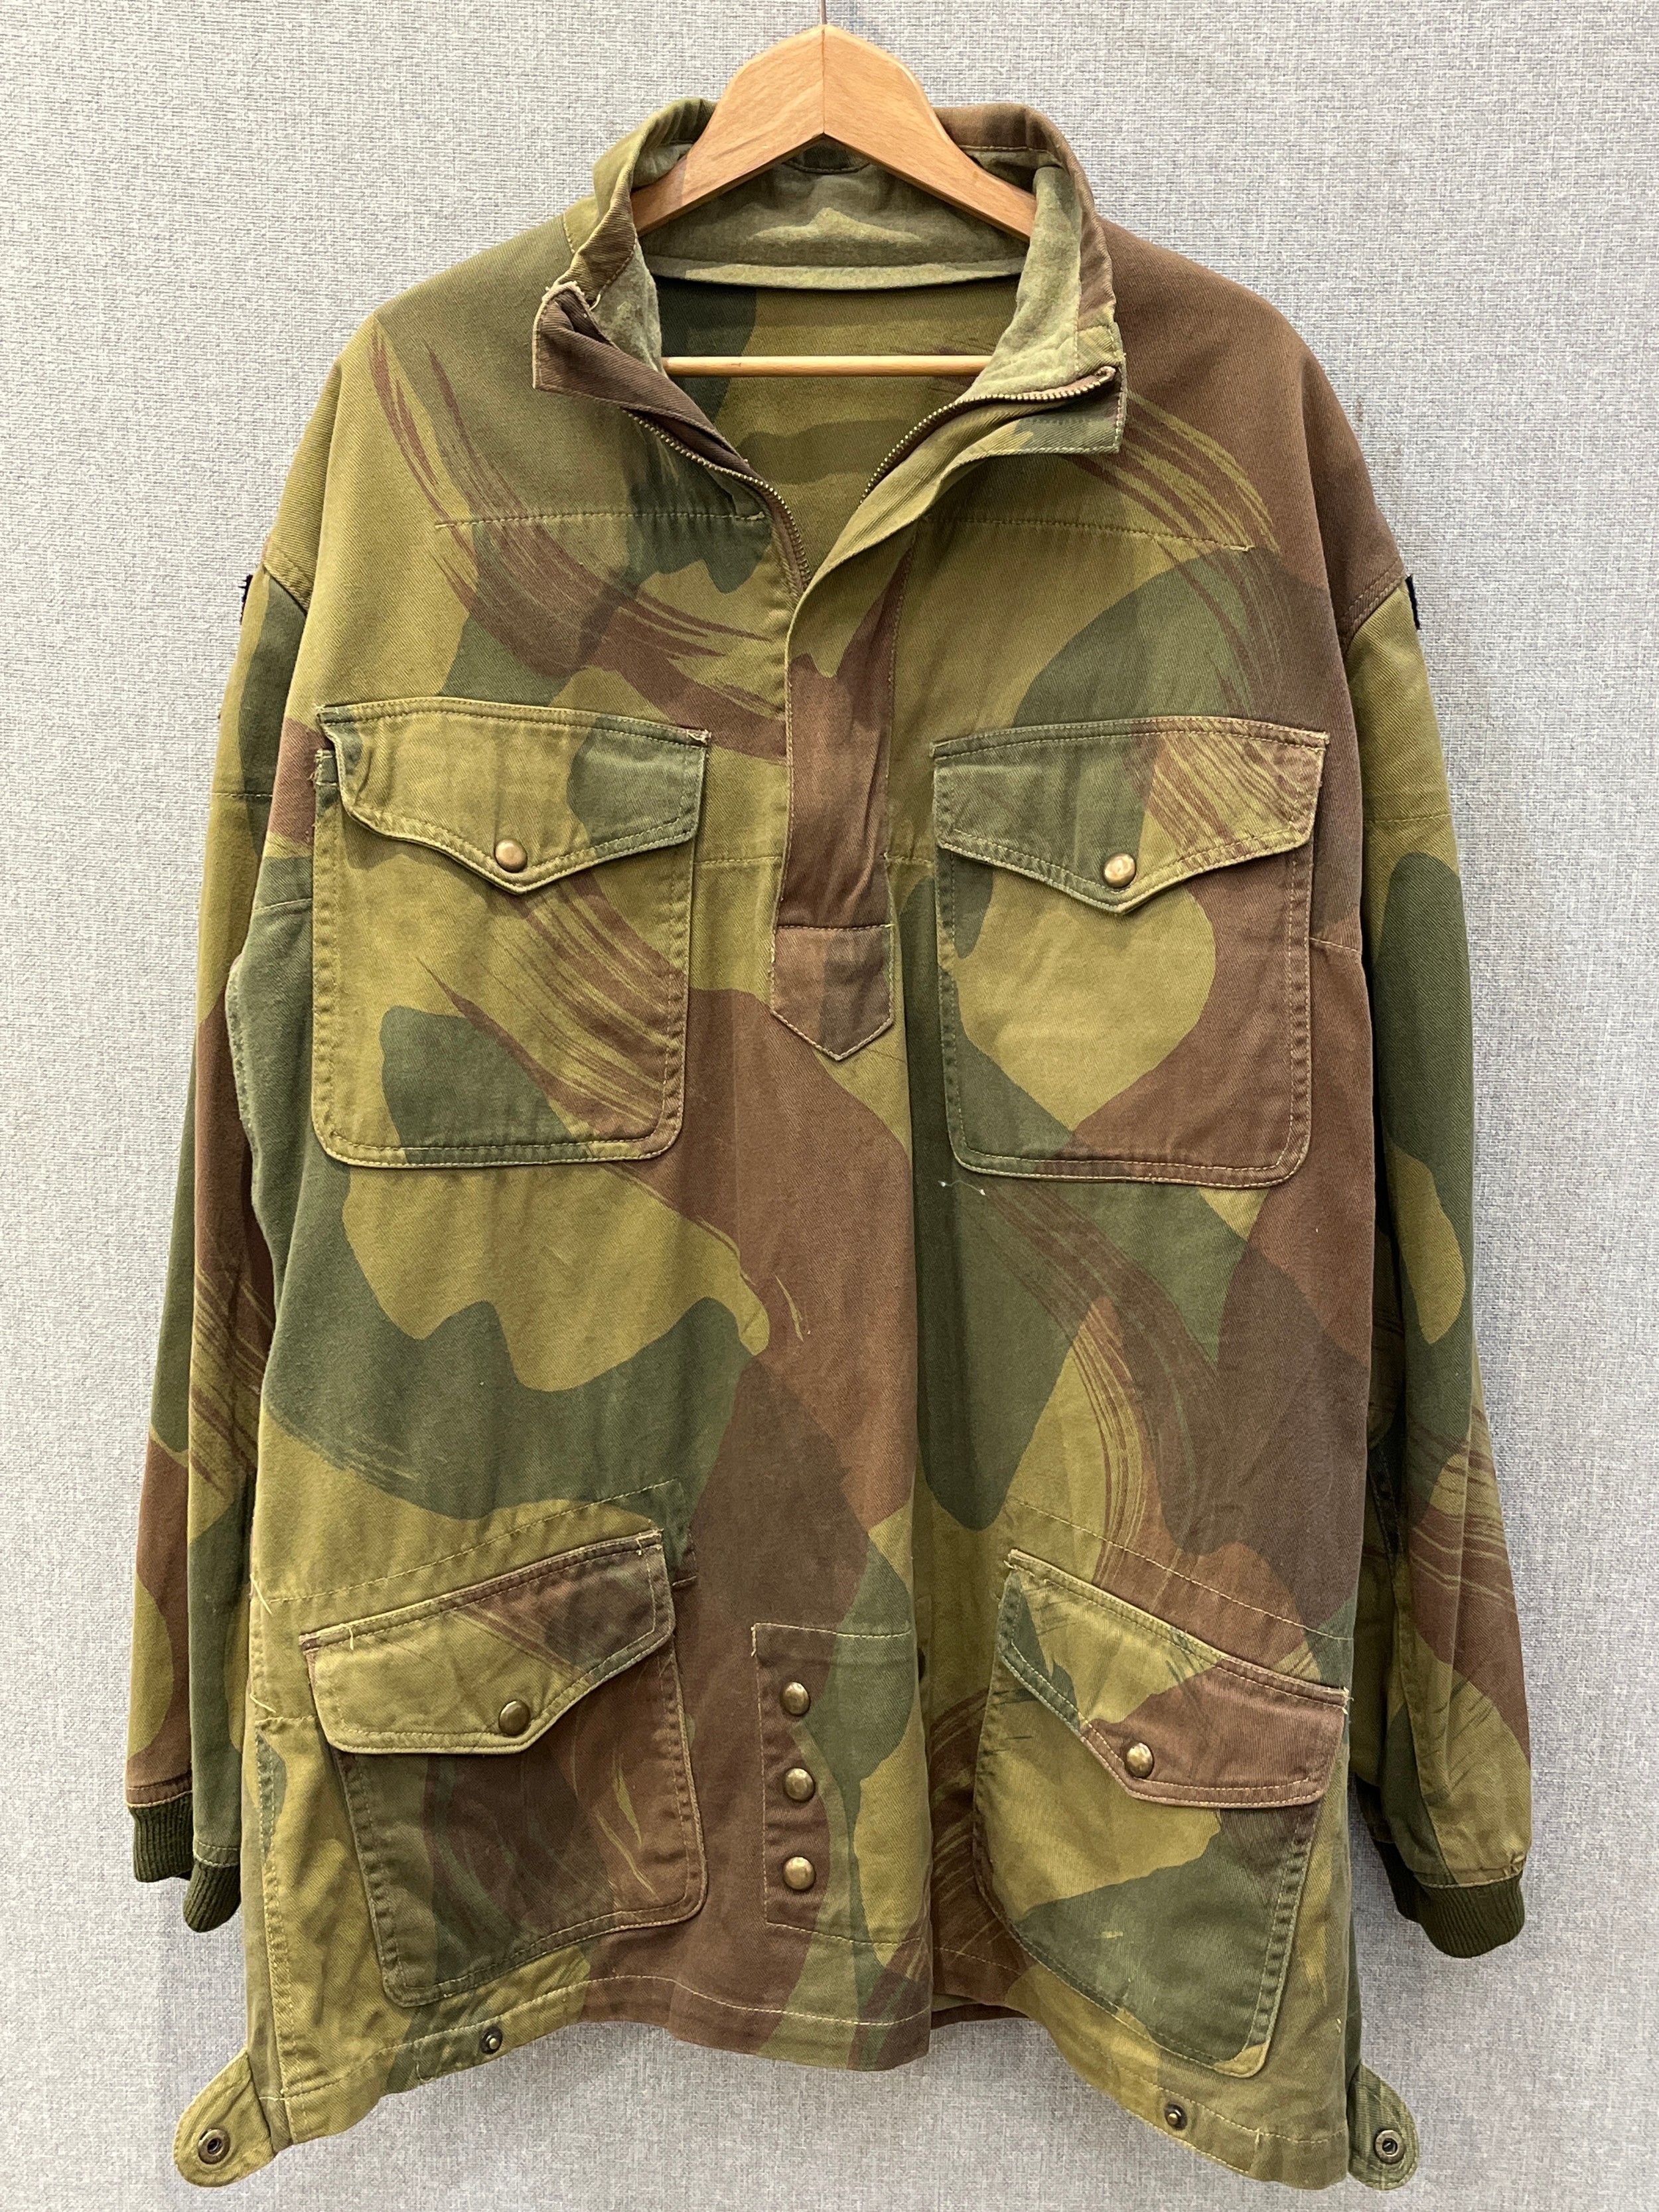 A WWII Airborne Division Denison Smock by John Gordon & Co., dated 1944, size 7, half-zip,